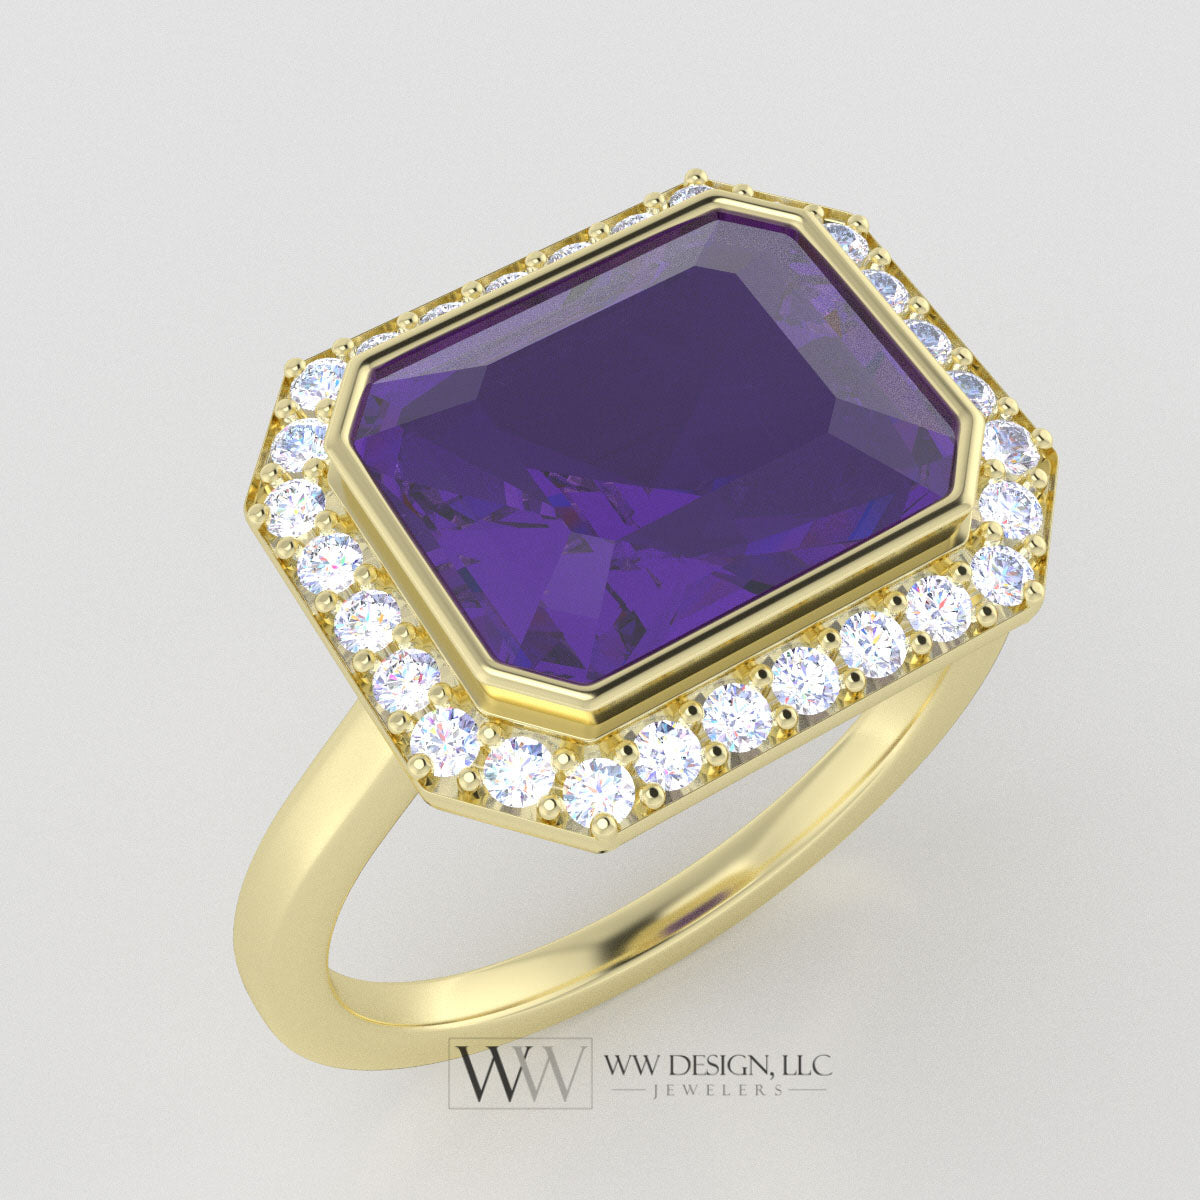 AAA Genuine 3.15ct Amethyst East West Emerald Shaped Ring with 0.28ctw Diamond Halo - 14k 18k Gold (Y, R,W) Platinum